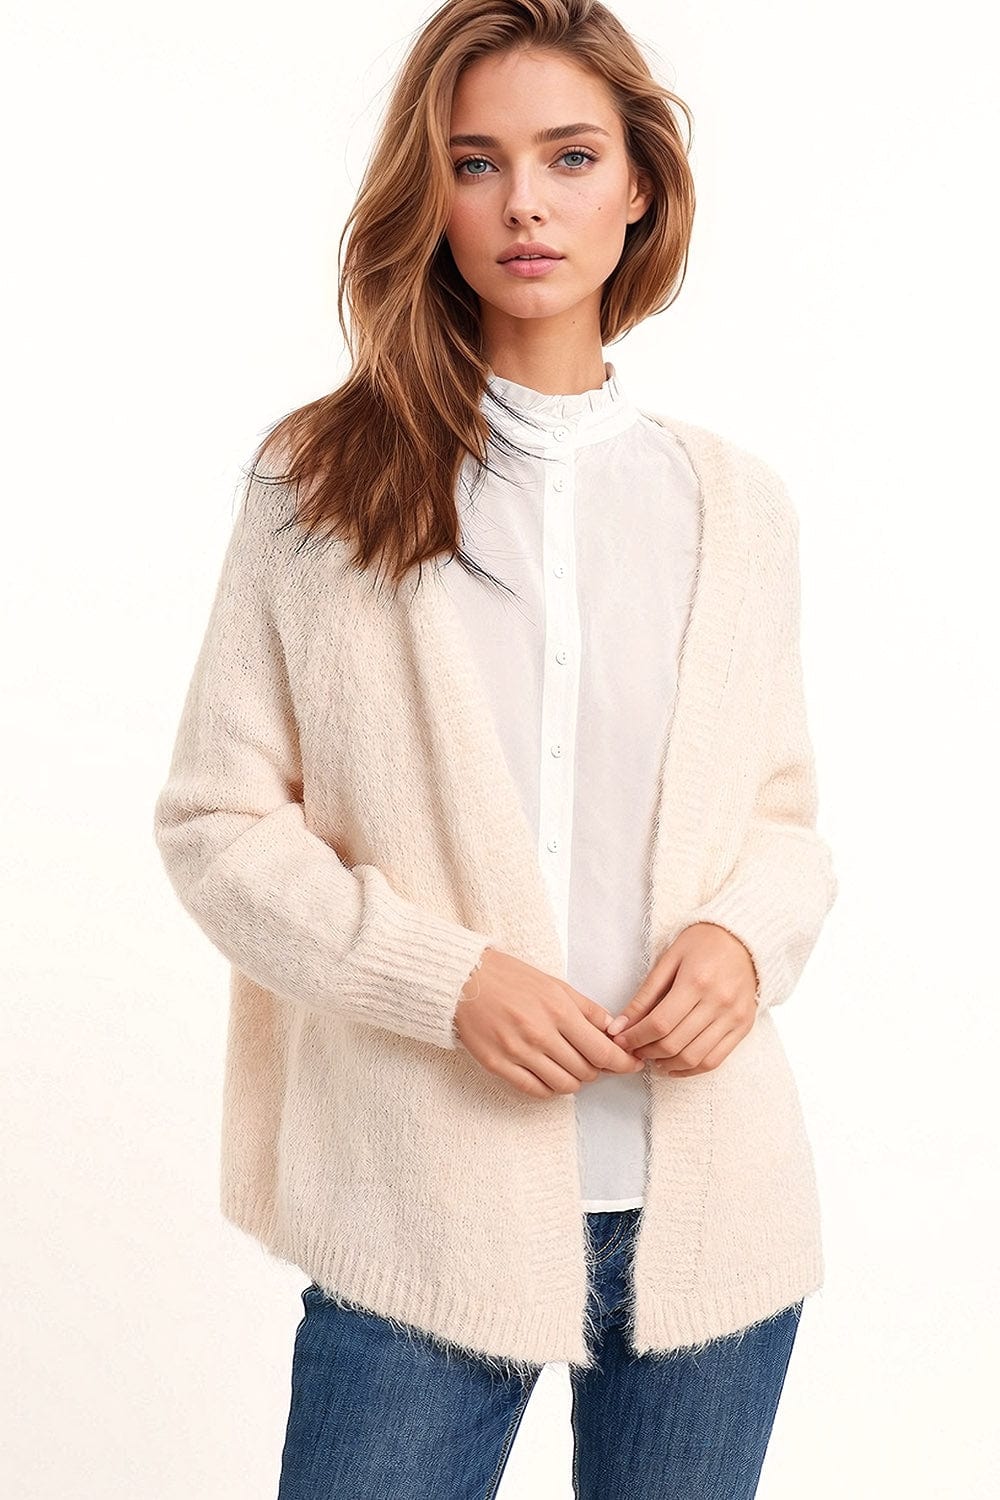 Q2 Women's Sweater Oversized Fluffy Knit Open Cardigan In White With Rib At Them And Cuffs